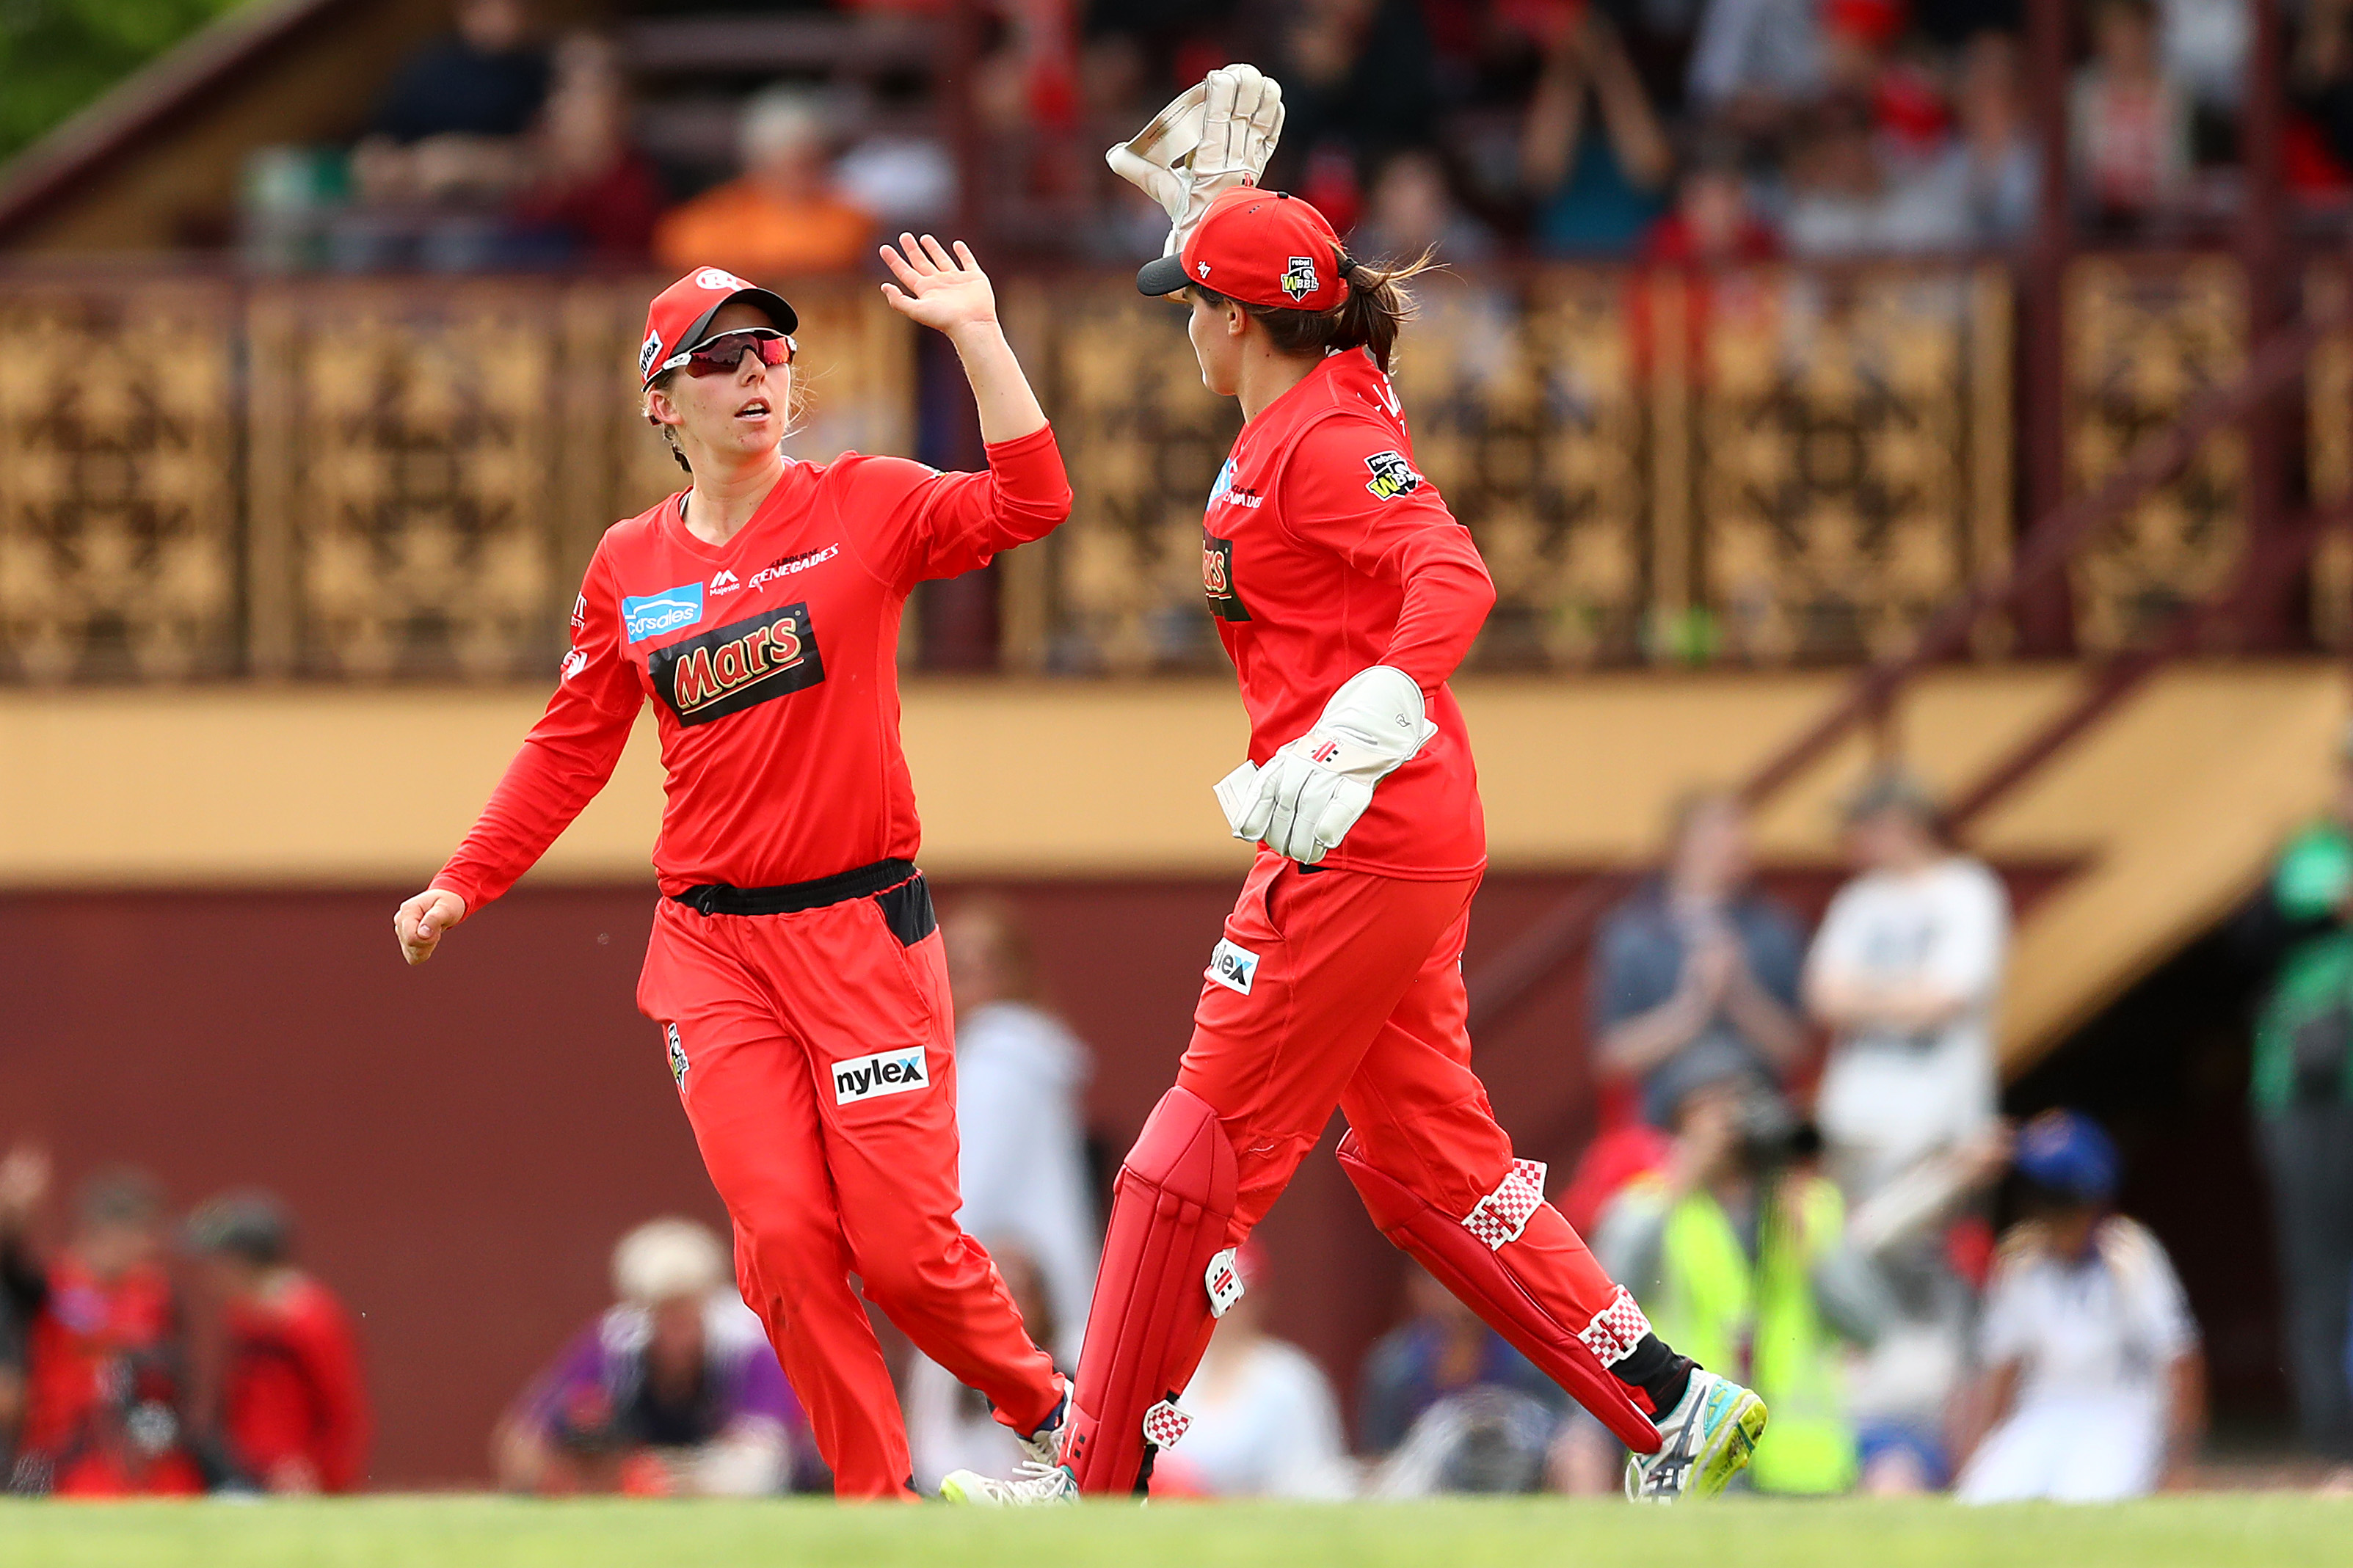 Melbourne Renegades cricketers compete in the WBBL in Ballarat in 2021